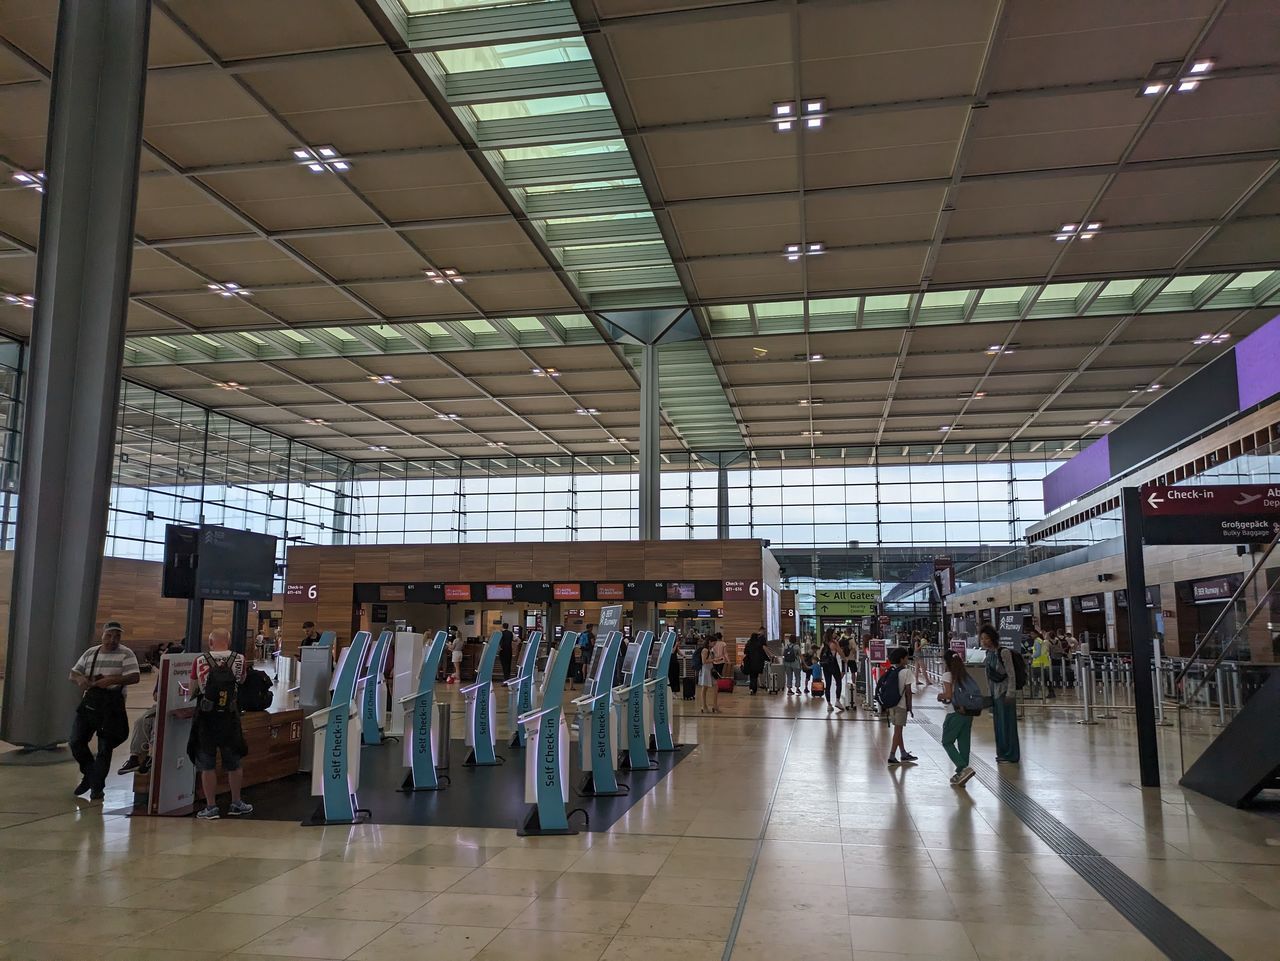 indoors, group of people, large group of people, crowd, airport, building, transport, architecture, airport terminal, adult, men, public transport, travel, business, ceiling, women, business finance and industry, infrastructure, transportation, retail